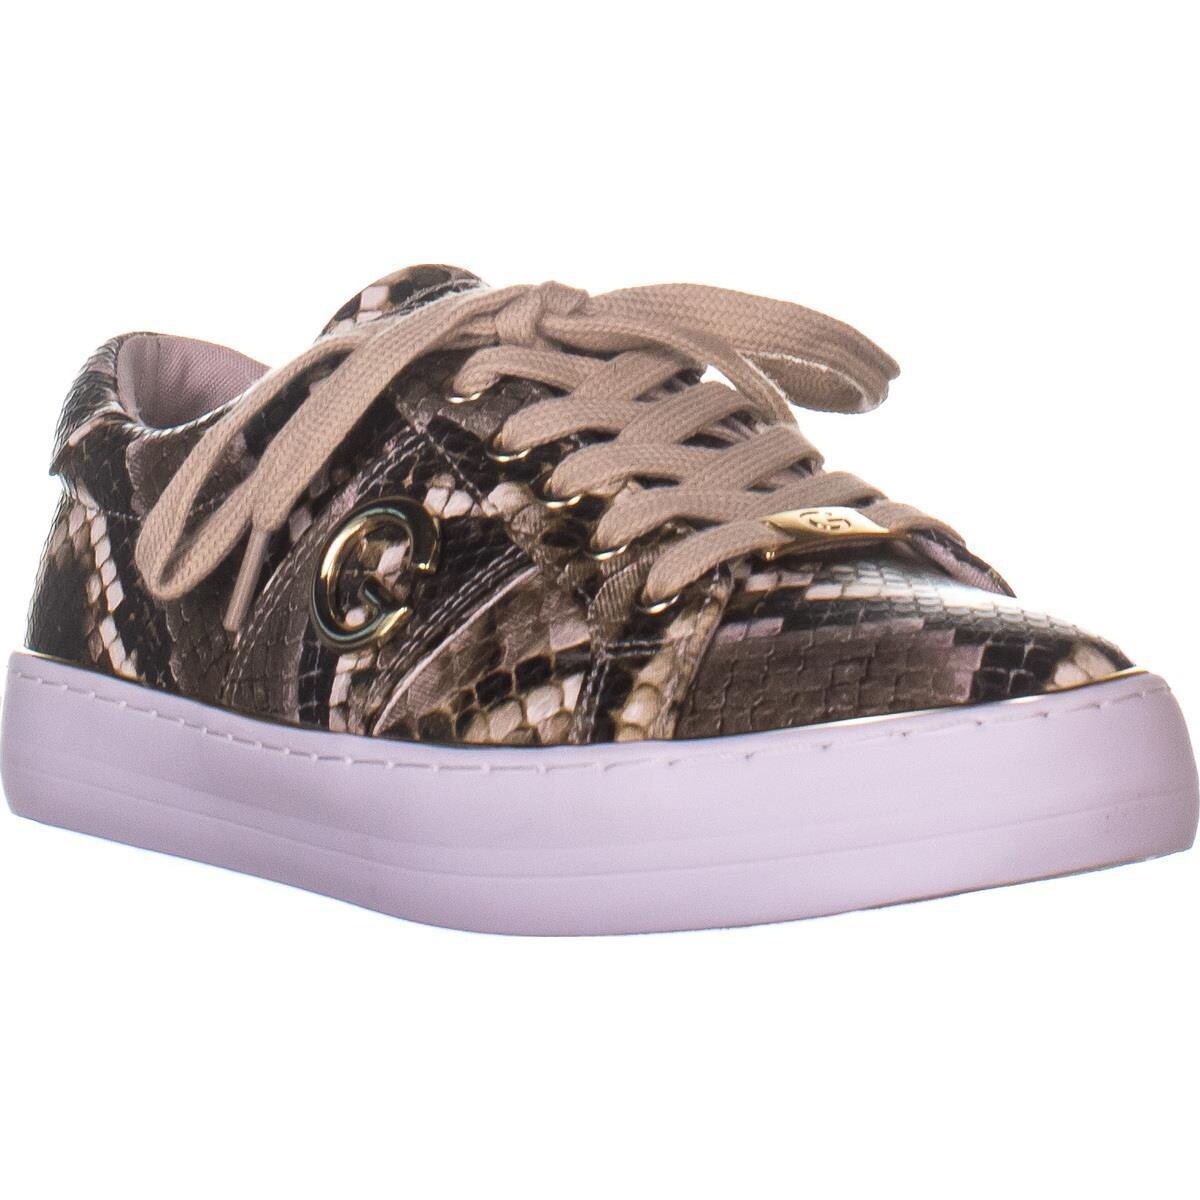 Guess Grandy Lace Up Sneakers, Taupe 